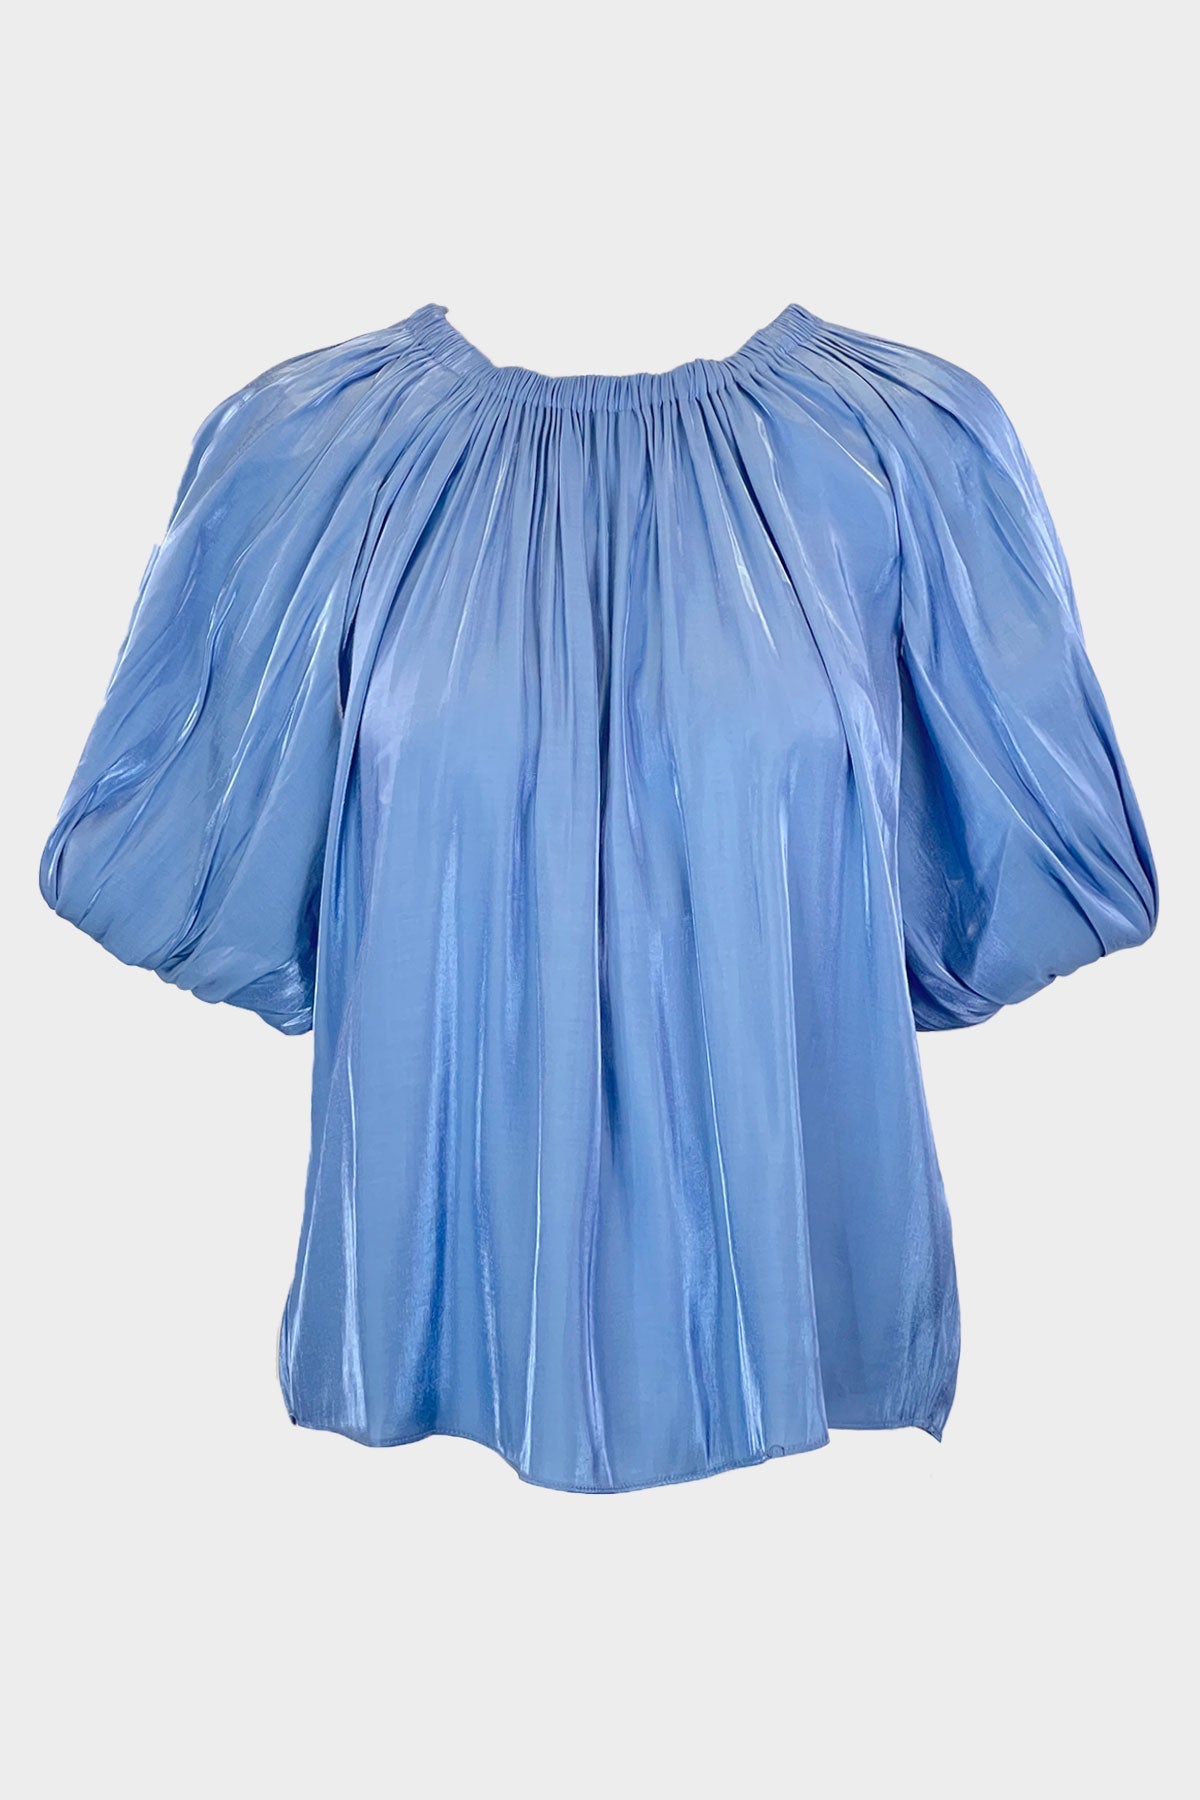 Flo Puff Sleeve Top in River - shop-olivia.com